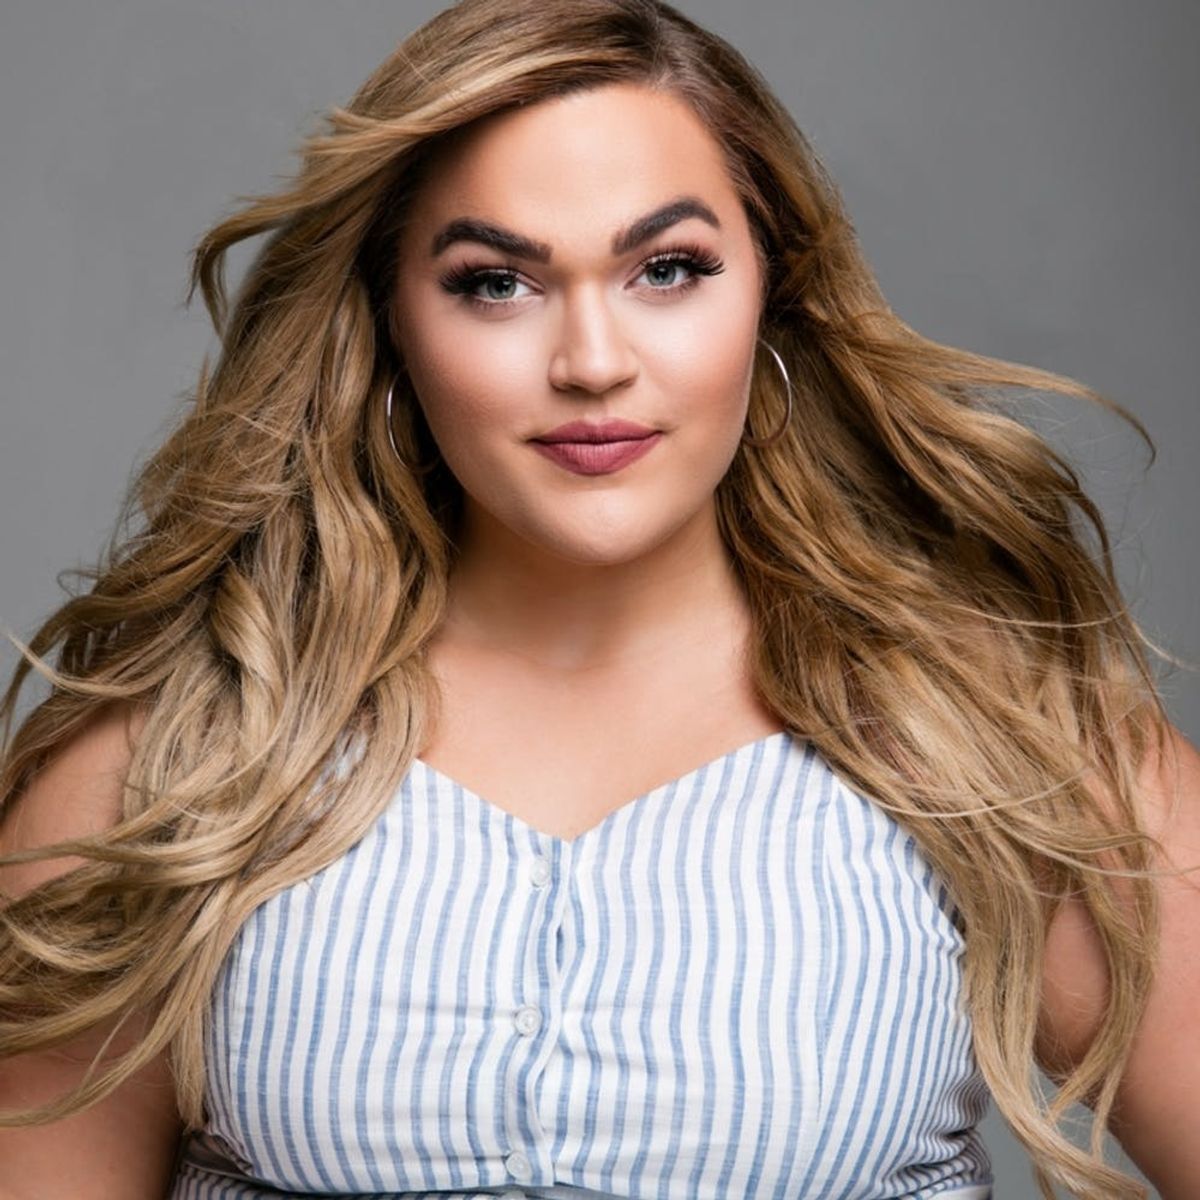 YouTuber Loey Lane Has Built an Empowering Brand By Calling Out Body-Shamers